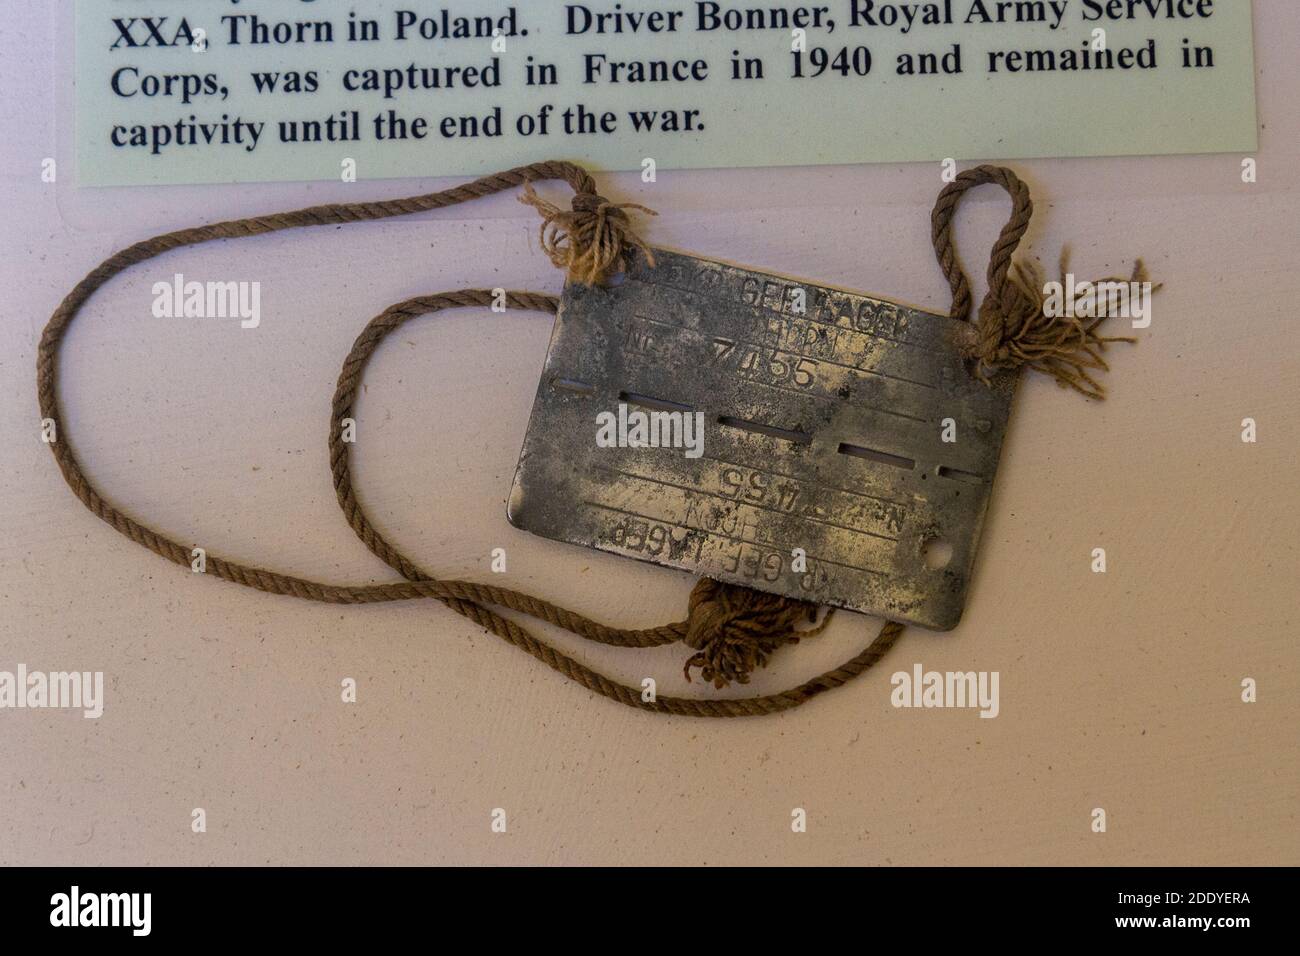 Identity tag worn by POW at Stalag XXA, Thorn, Poland, Thorpe Camp Visitor Centre, a WWII Royal Air Force barracks, Lincolnshire, UK. Stock Photo